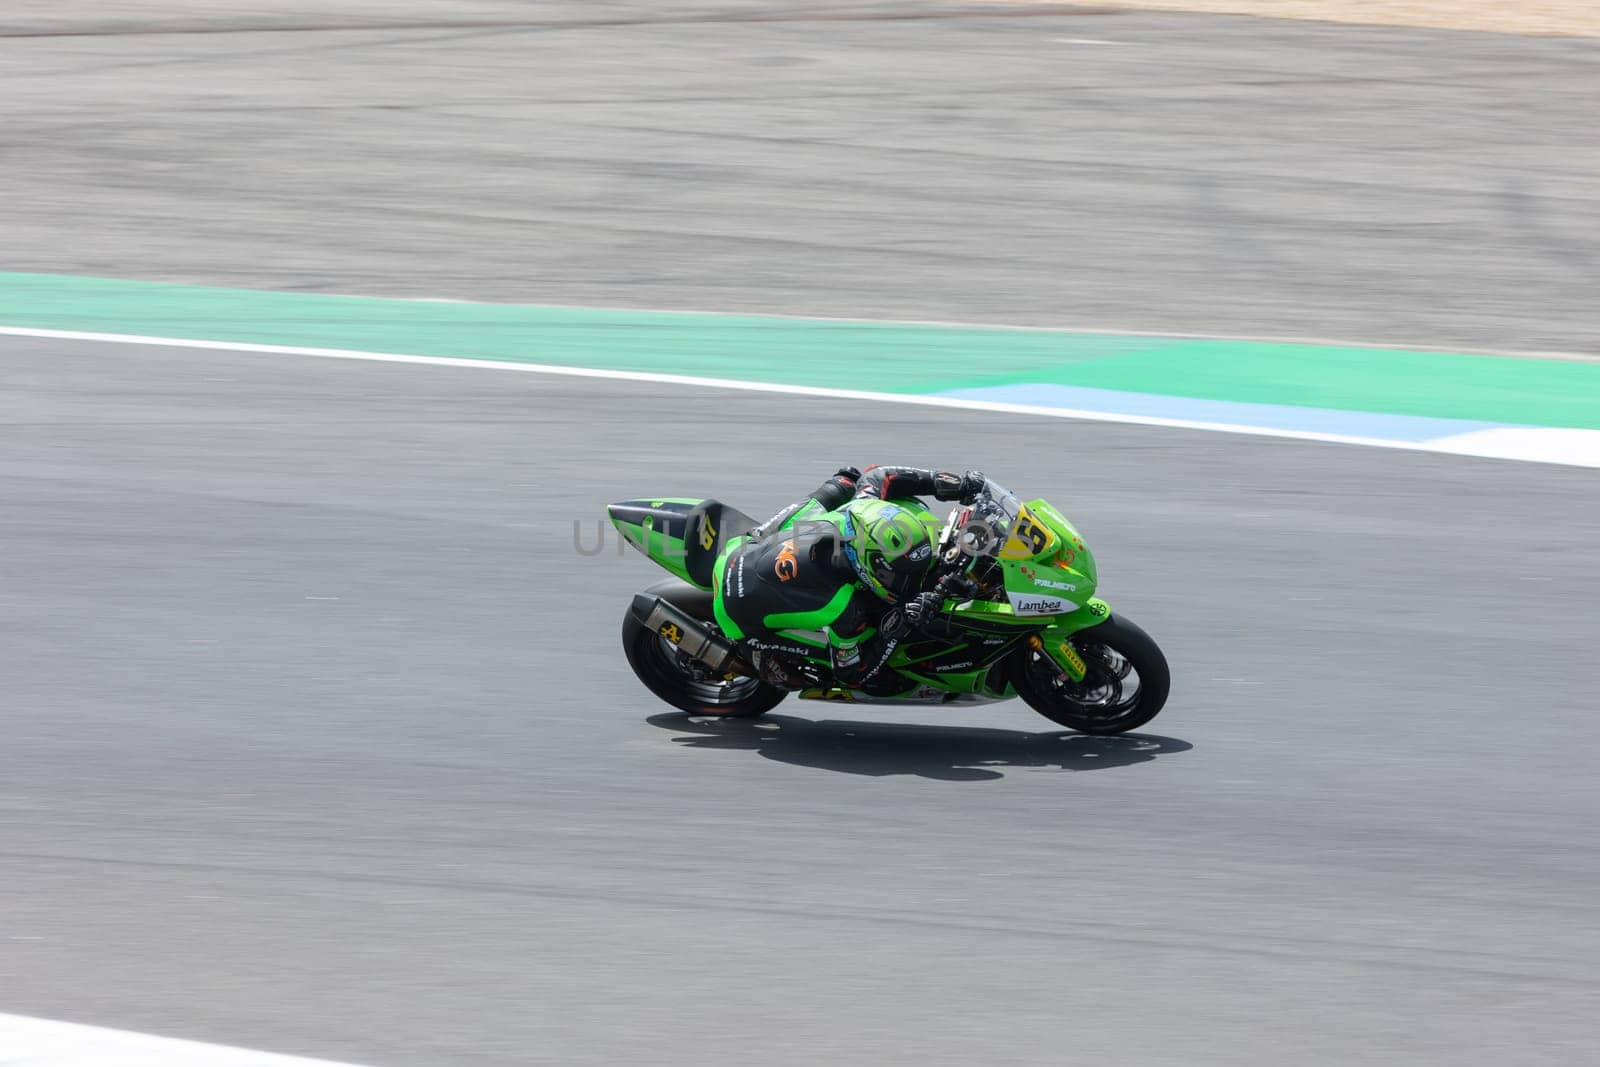 6 may 2023, Estoril, Portugal - MotoGP racing - Speeding Through the Green Circuit: A Thrilling Motorcycle Ride on the Race Track by Studia72